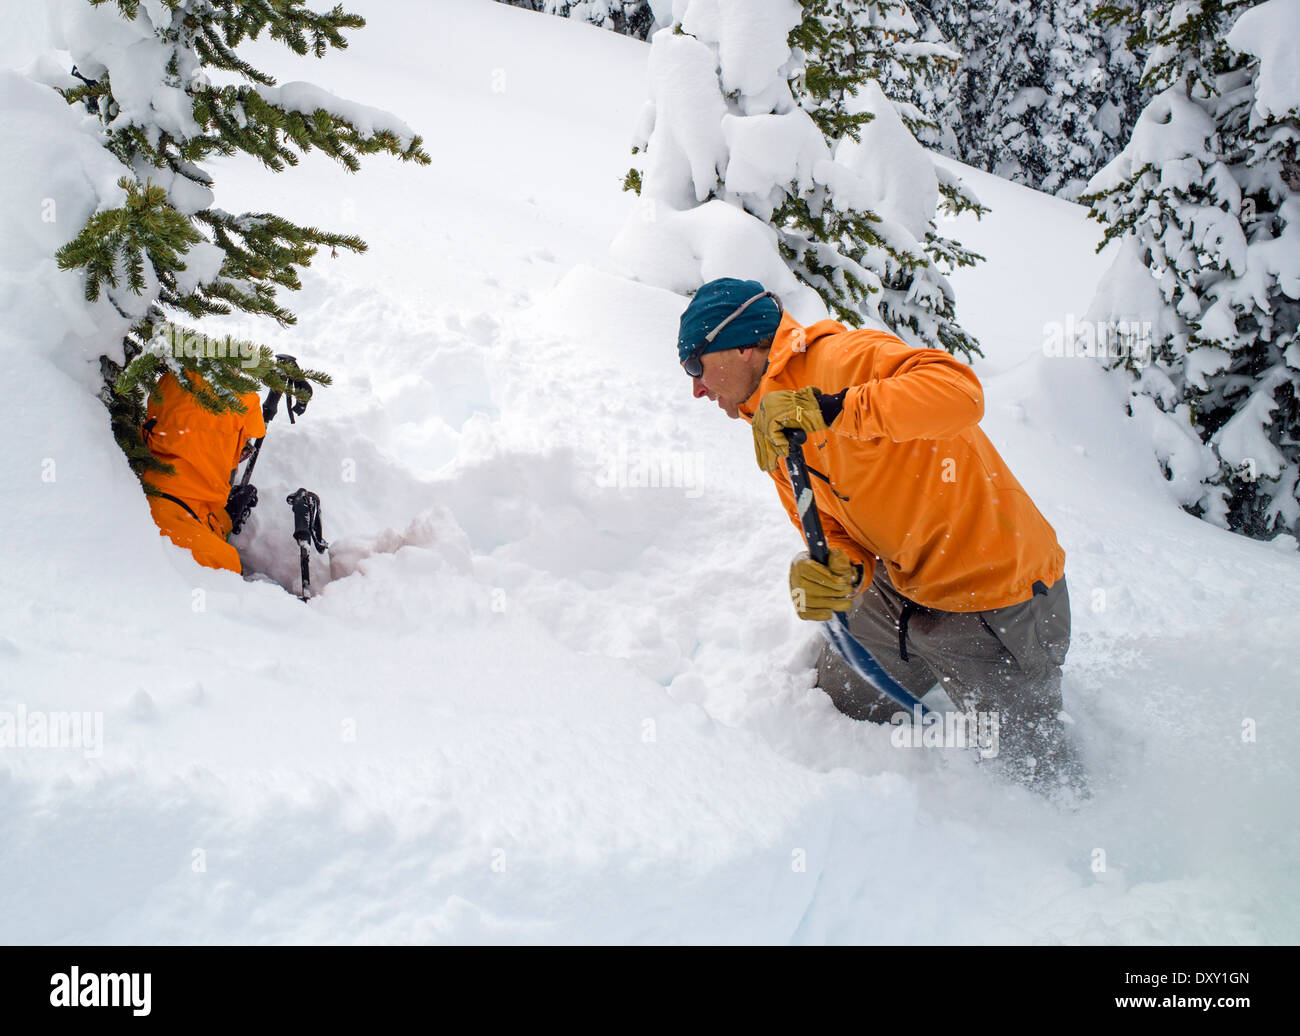 Professional back country ski mountain guides demonstrating a rescue technique for skier trapped in snow tree well Stock Photo